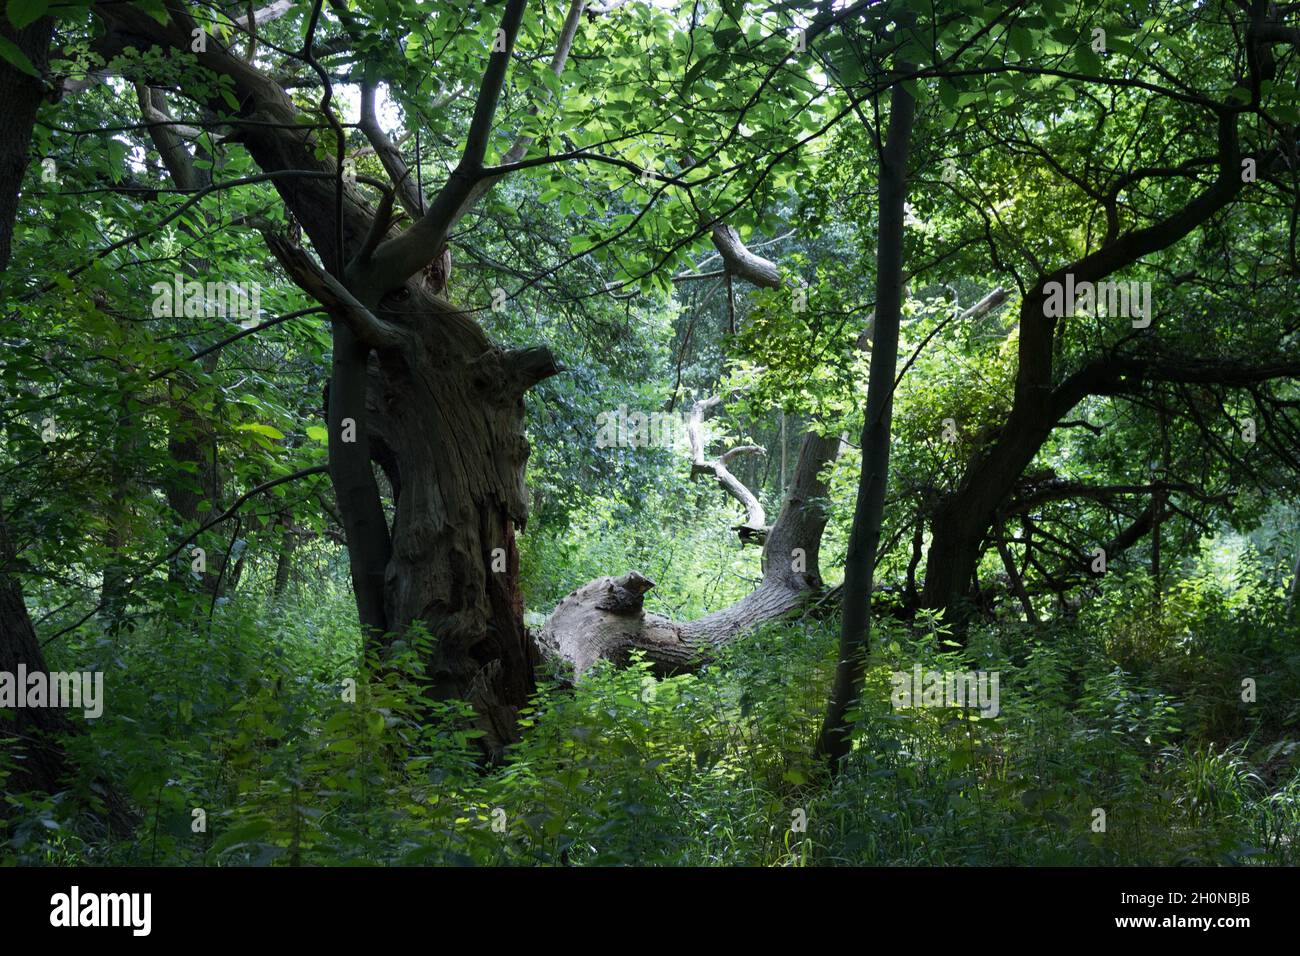 Tree Bark, Tree Trunk, Nature, Plants, Woods, Tree Branches, Greenery, Looking into the Woods Stock Photo